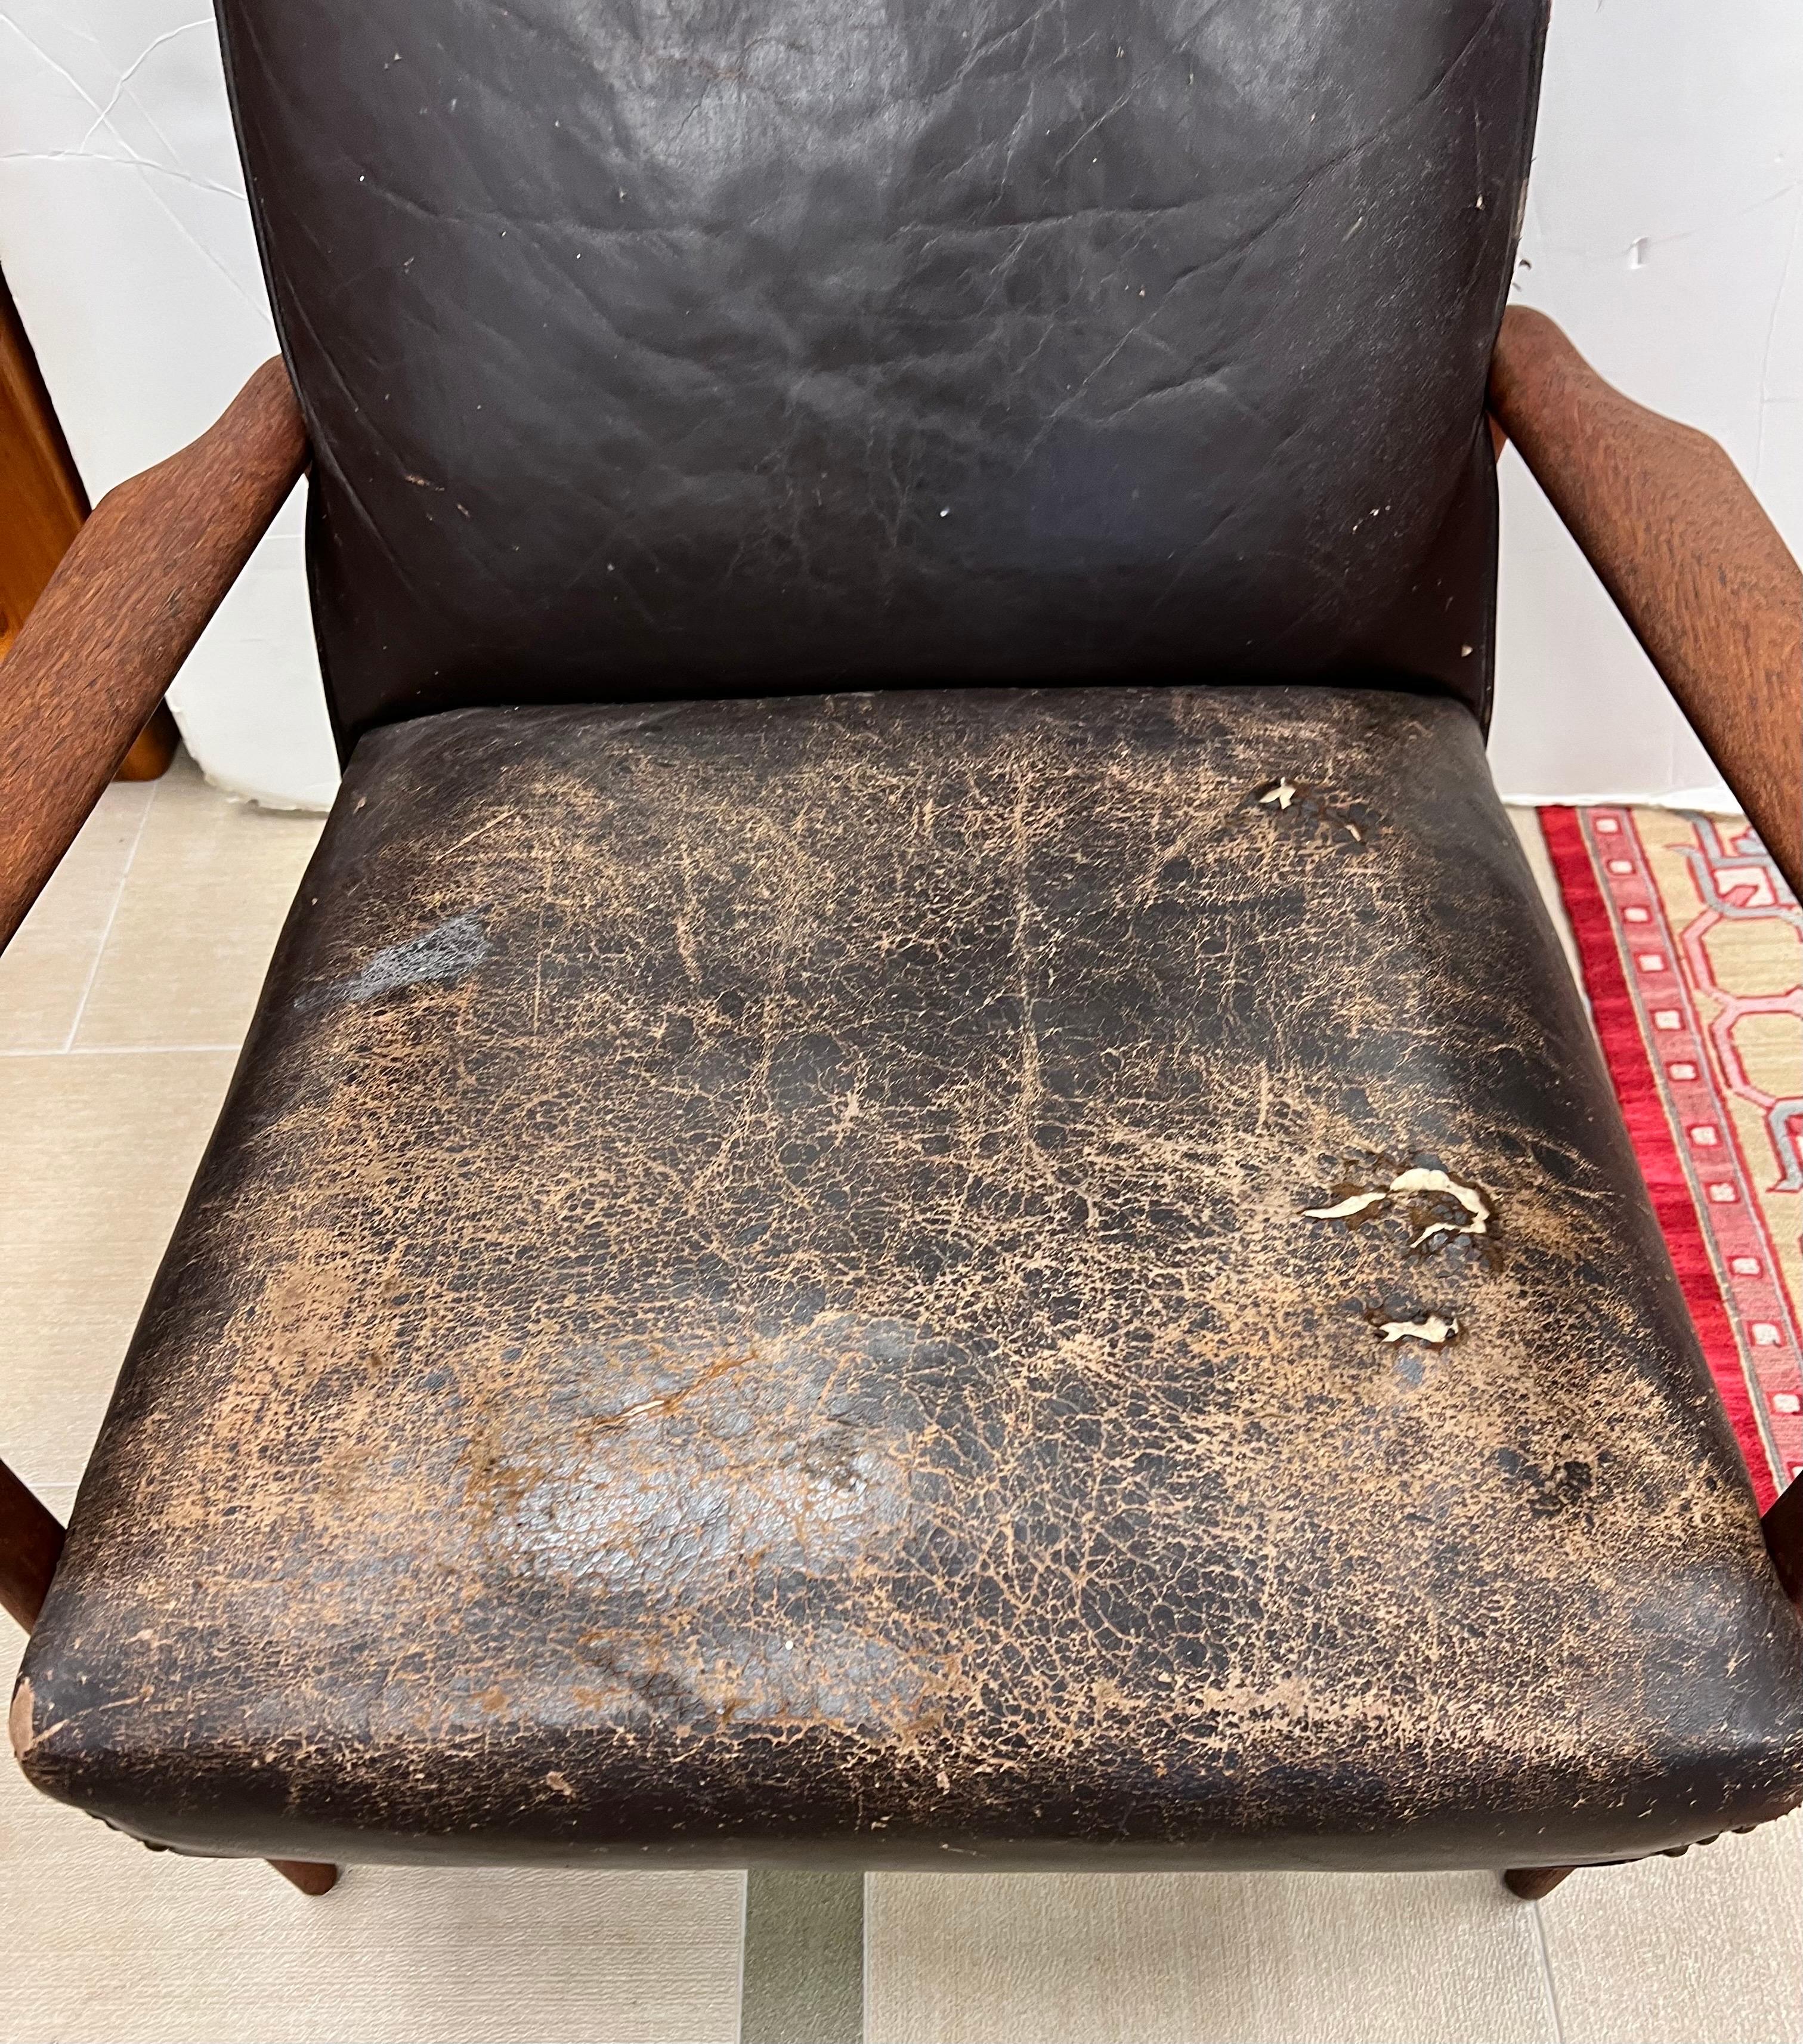 Rare Danish Modern Kofod-Larsen lounge chair done in leather upholstery which is very distressed and will need to be reupholstered. The chair is structurally sound. Priced commensurate with condition. An iconic Danish Modern masterpiece by Ib